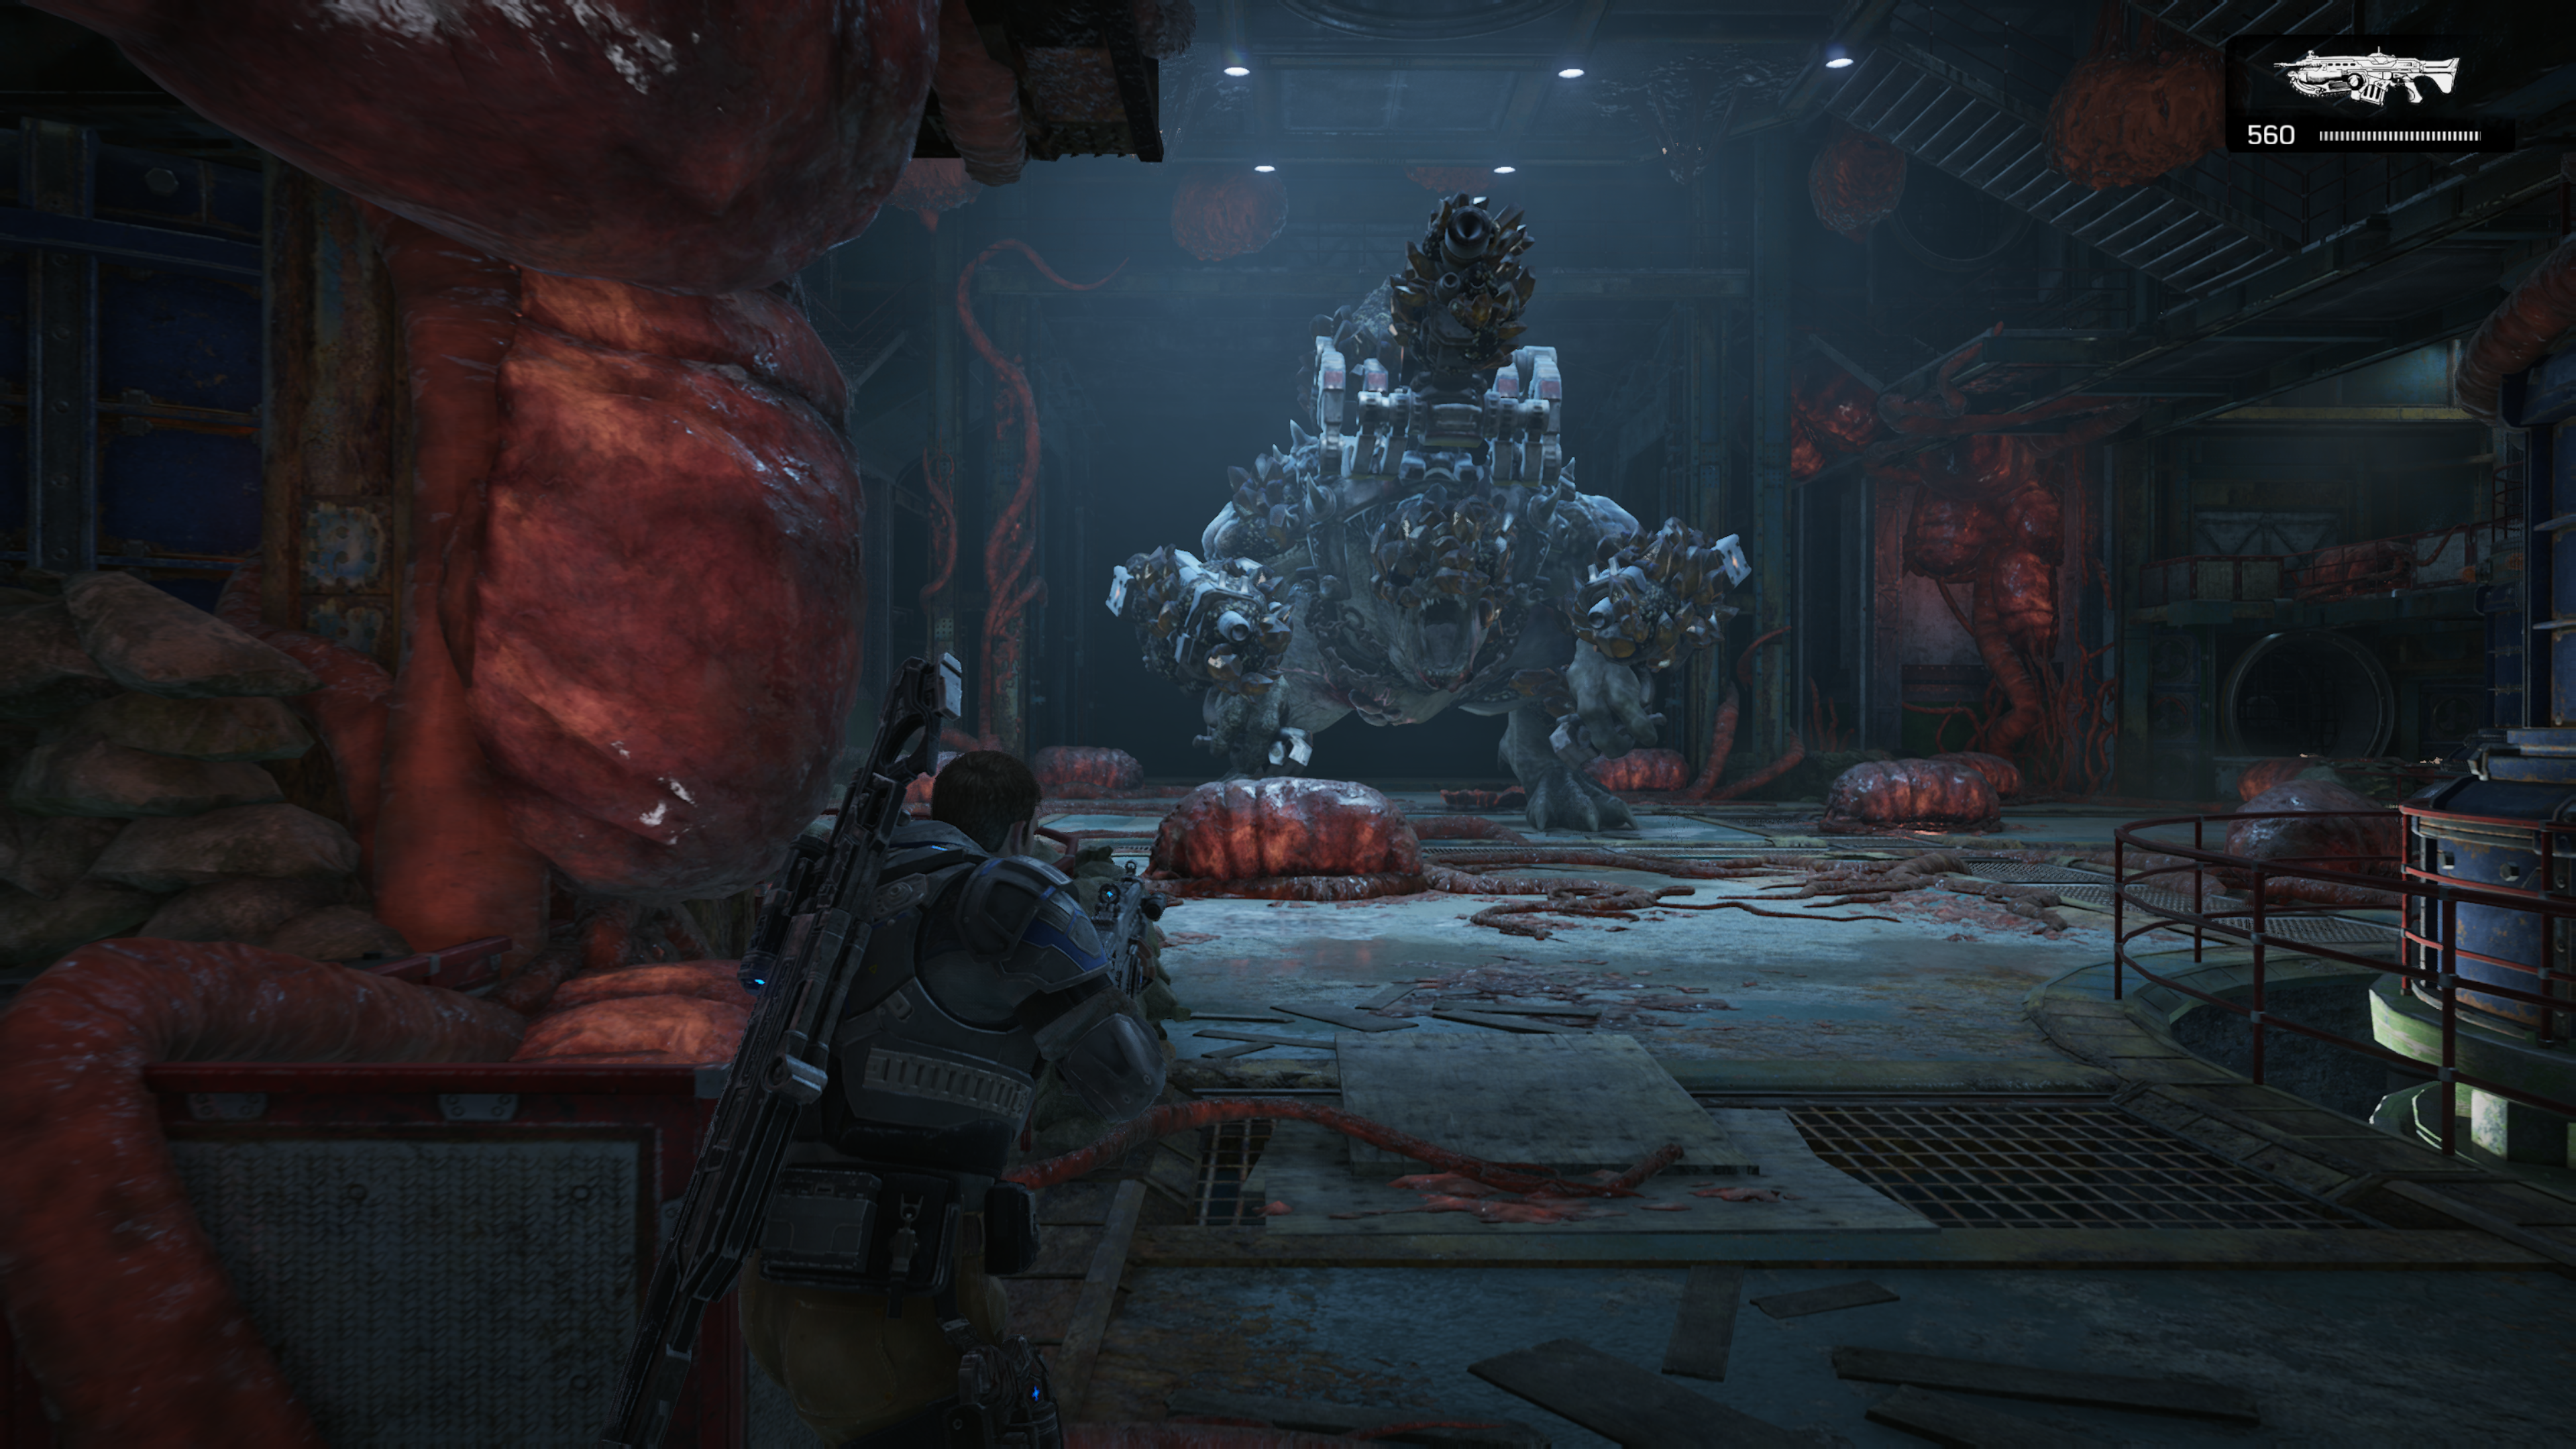 Gears of War 4 Will Be Well-Optimized on the PC